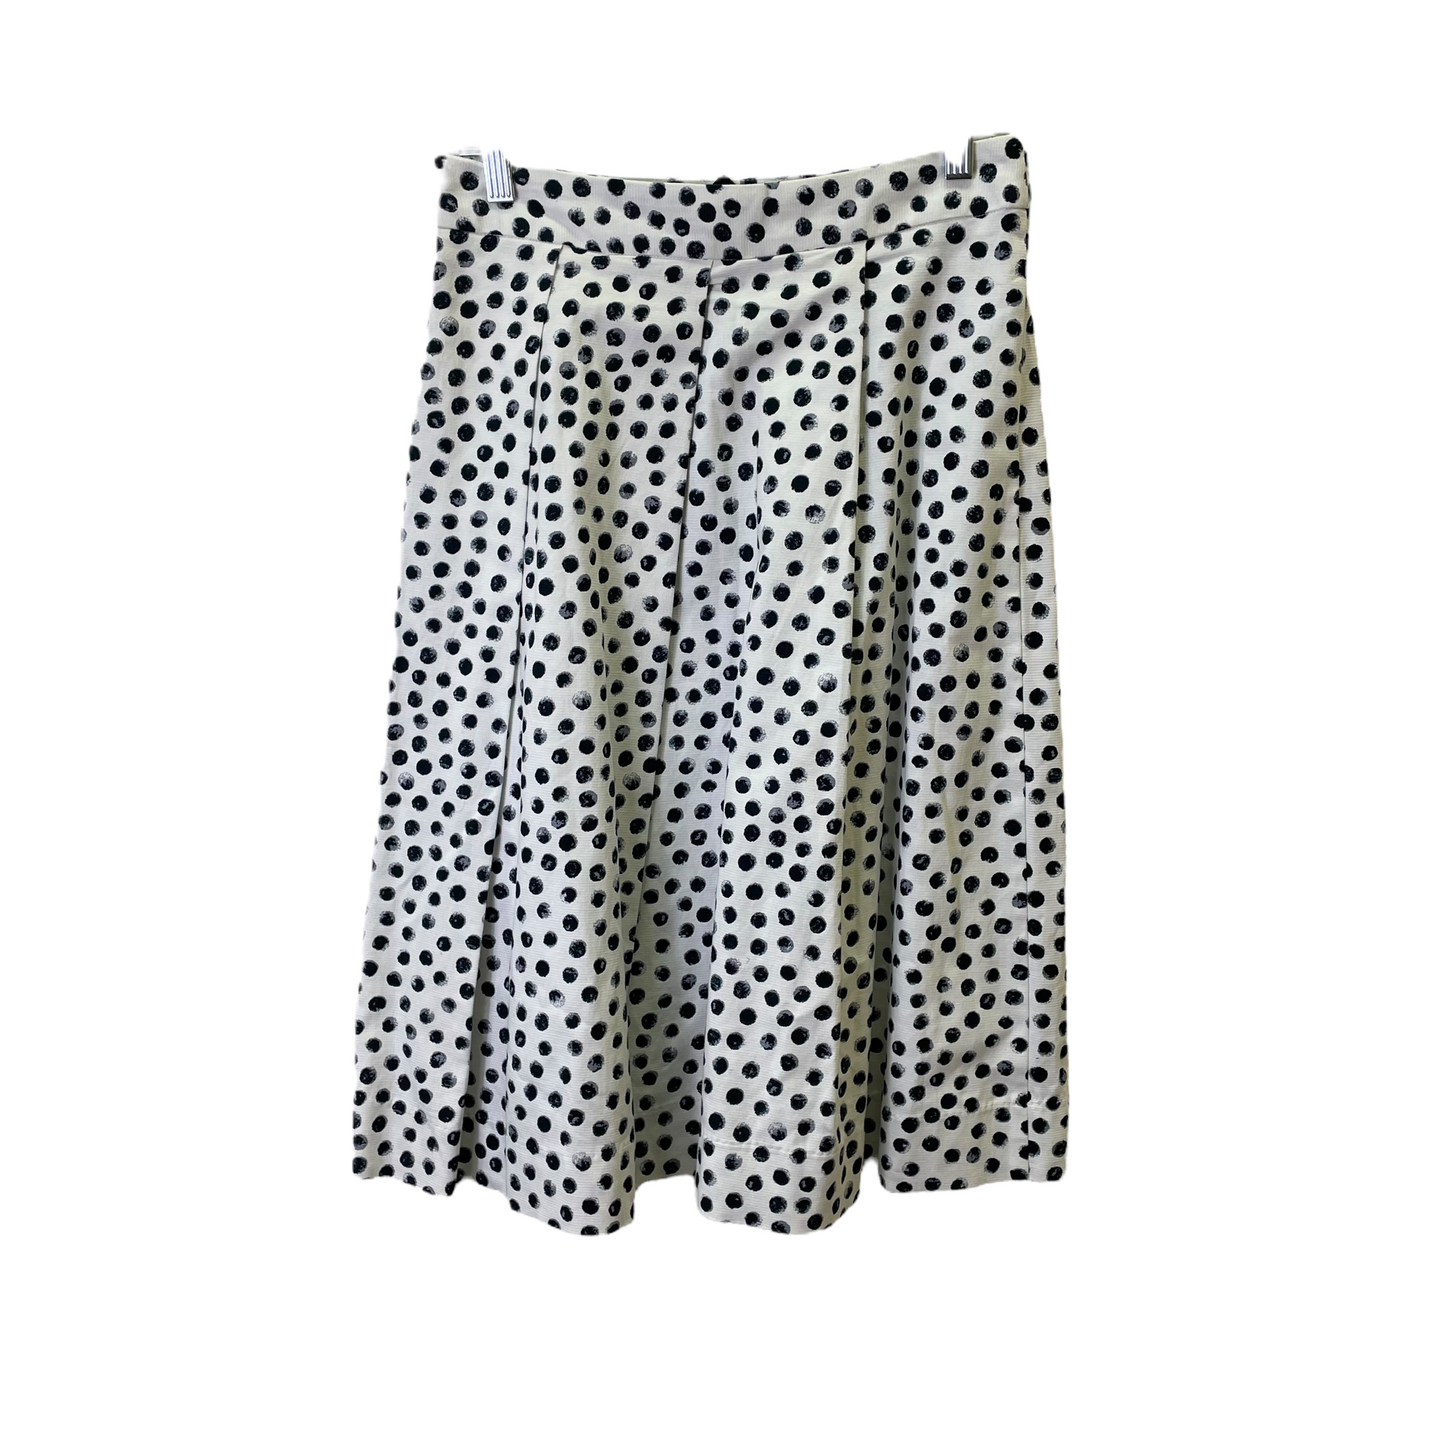 Black & White Skirt Mini & Short By Who What Wear, Size: 2